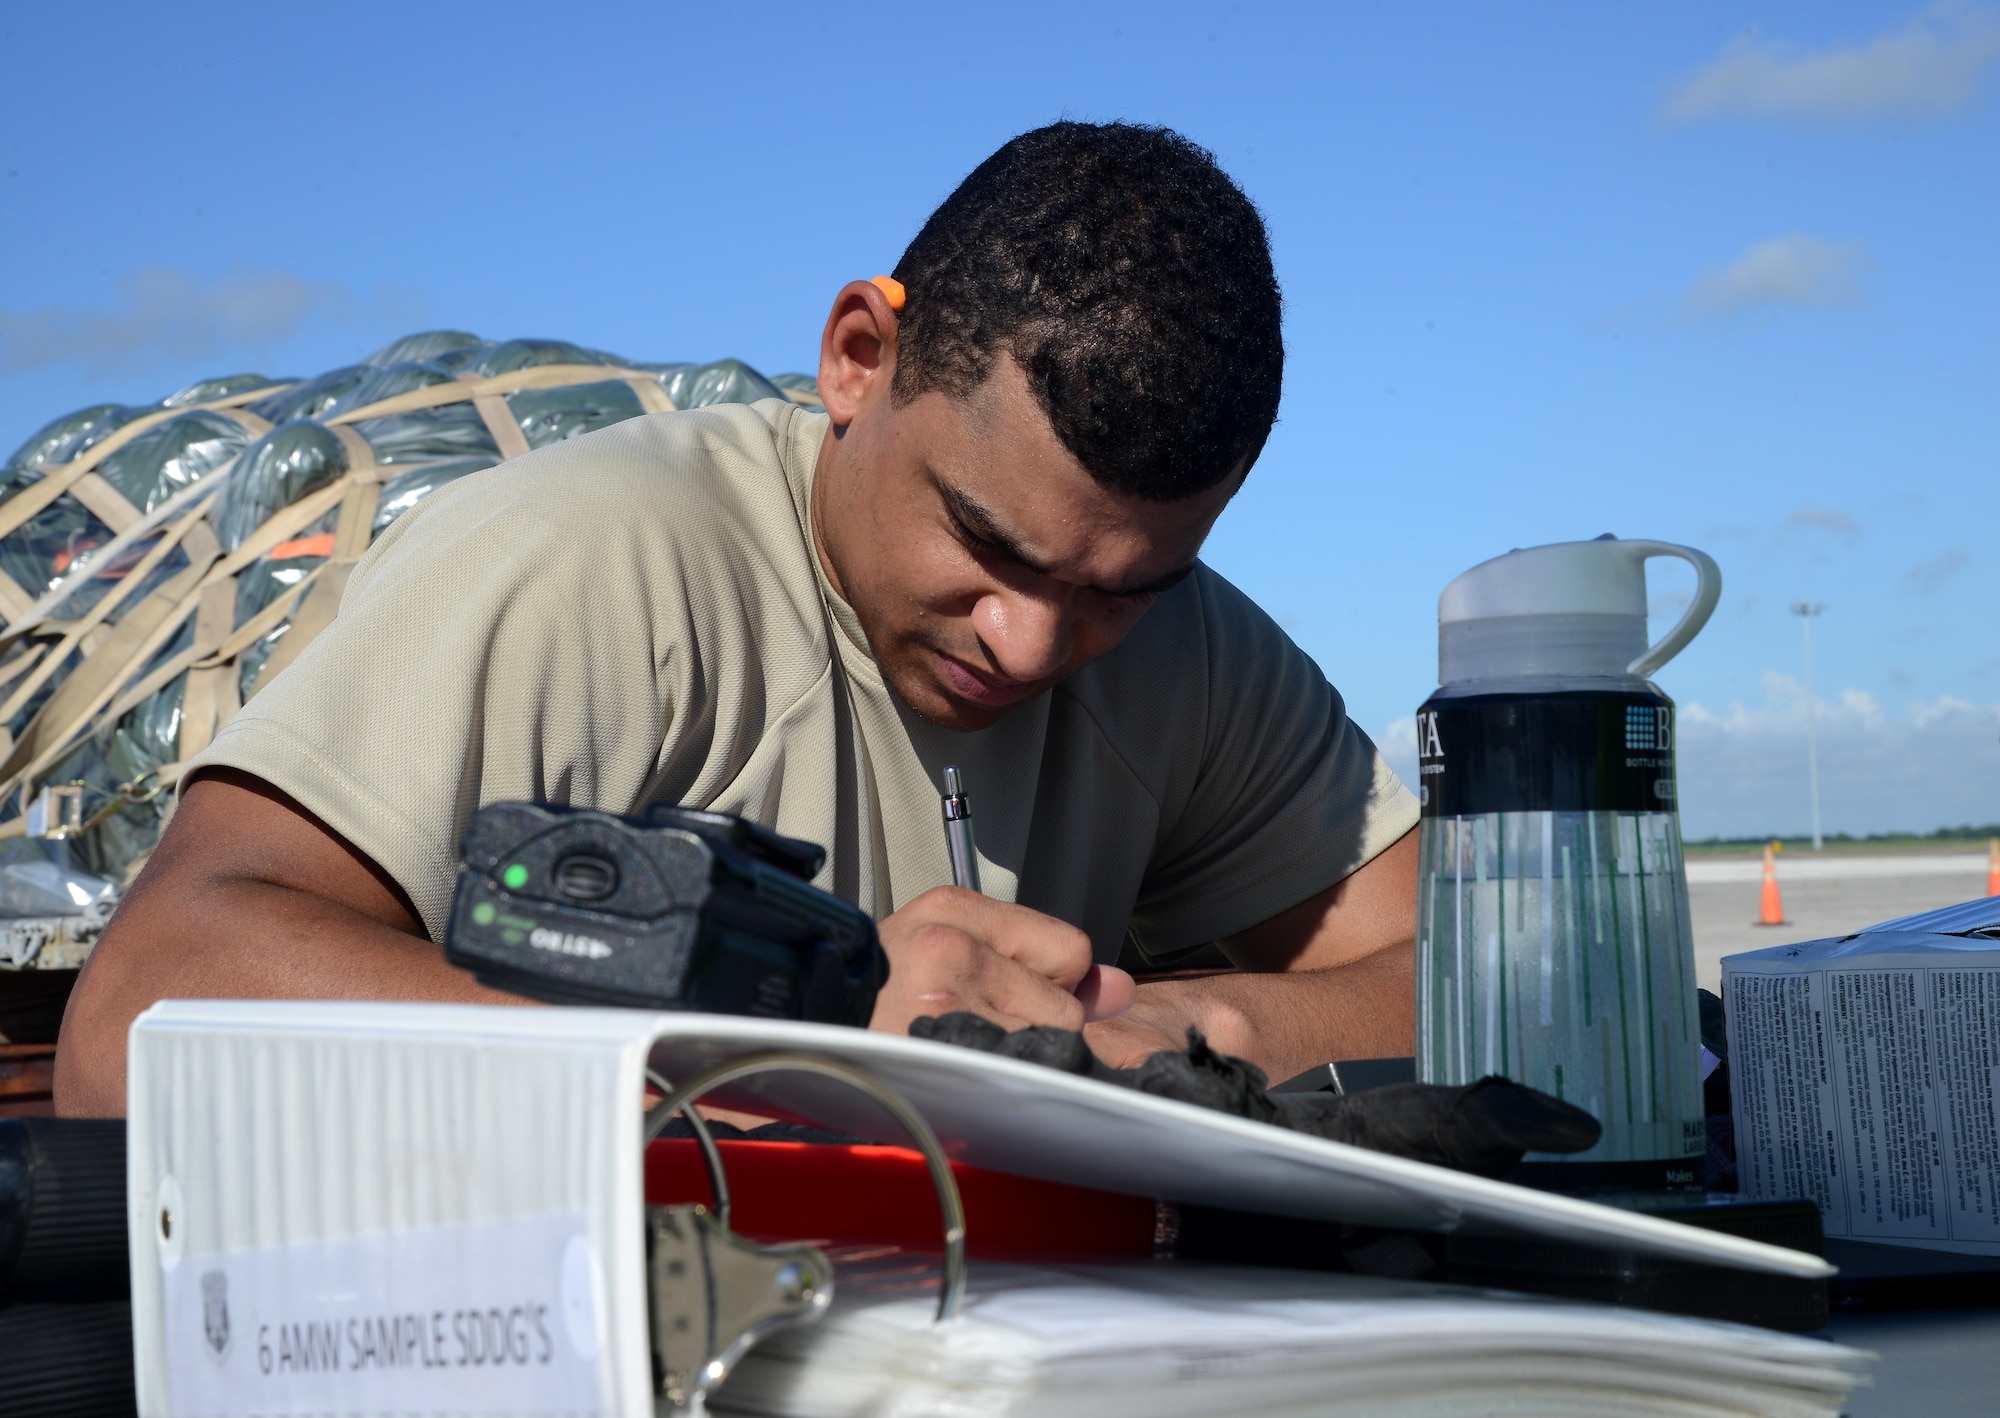 Airman 1st Class Andrew Small, a fleet management analysis technician assigned to the 6th Logistics Readiness Squadron, completes a cargo placard during a mobility exercise at MacDill Air Force Base, Fla., Aug. 16, 2016. Each individual piece of cargo is required to have a placard on it listing the contents and weight of the equipment to maintain accurate records. (U.S. Air Force Photo by Airman 1st Class Rito Smith) 